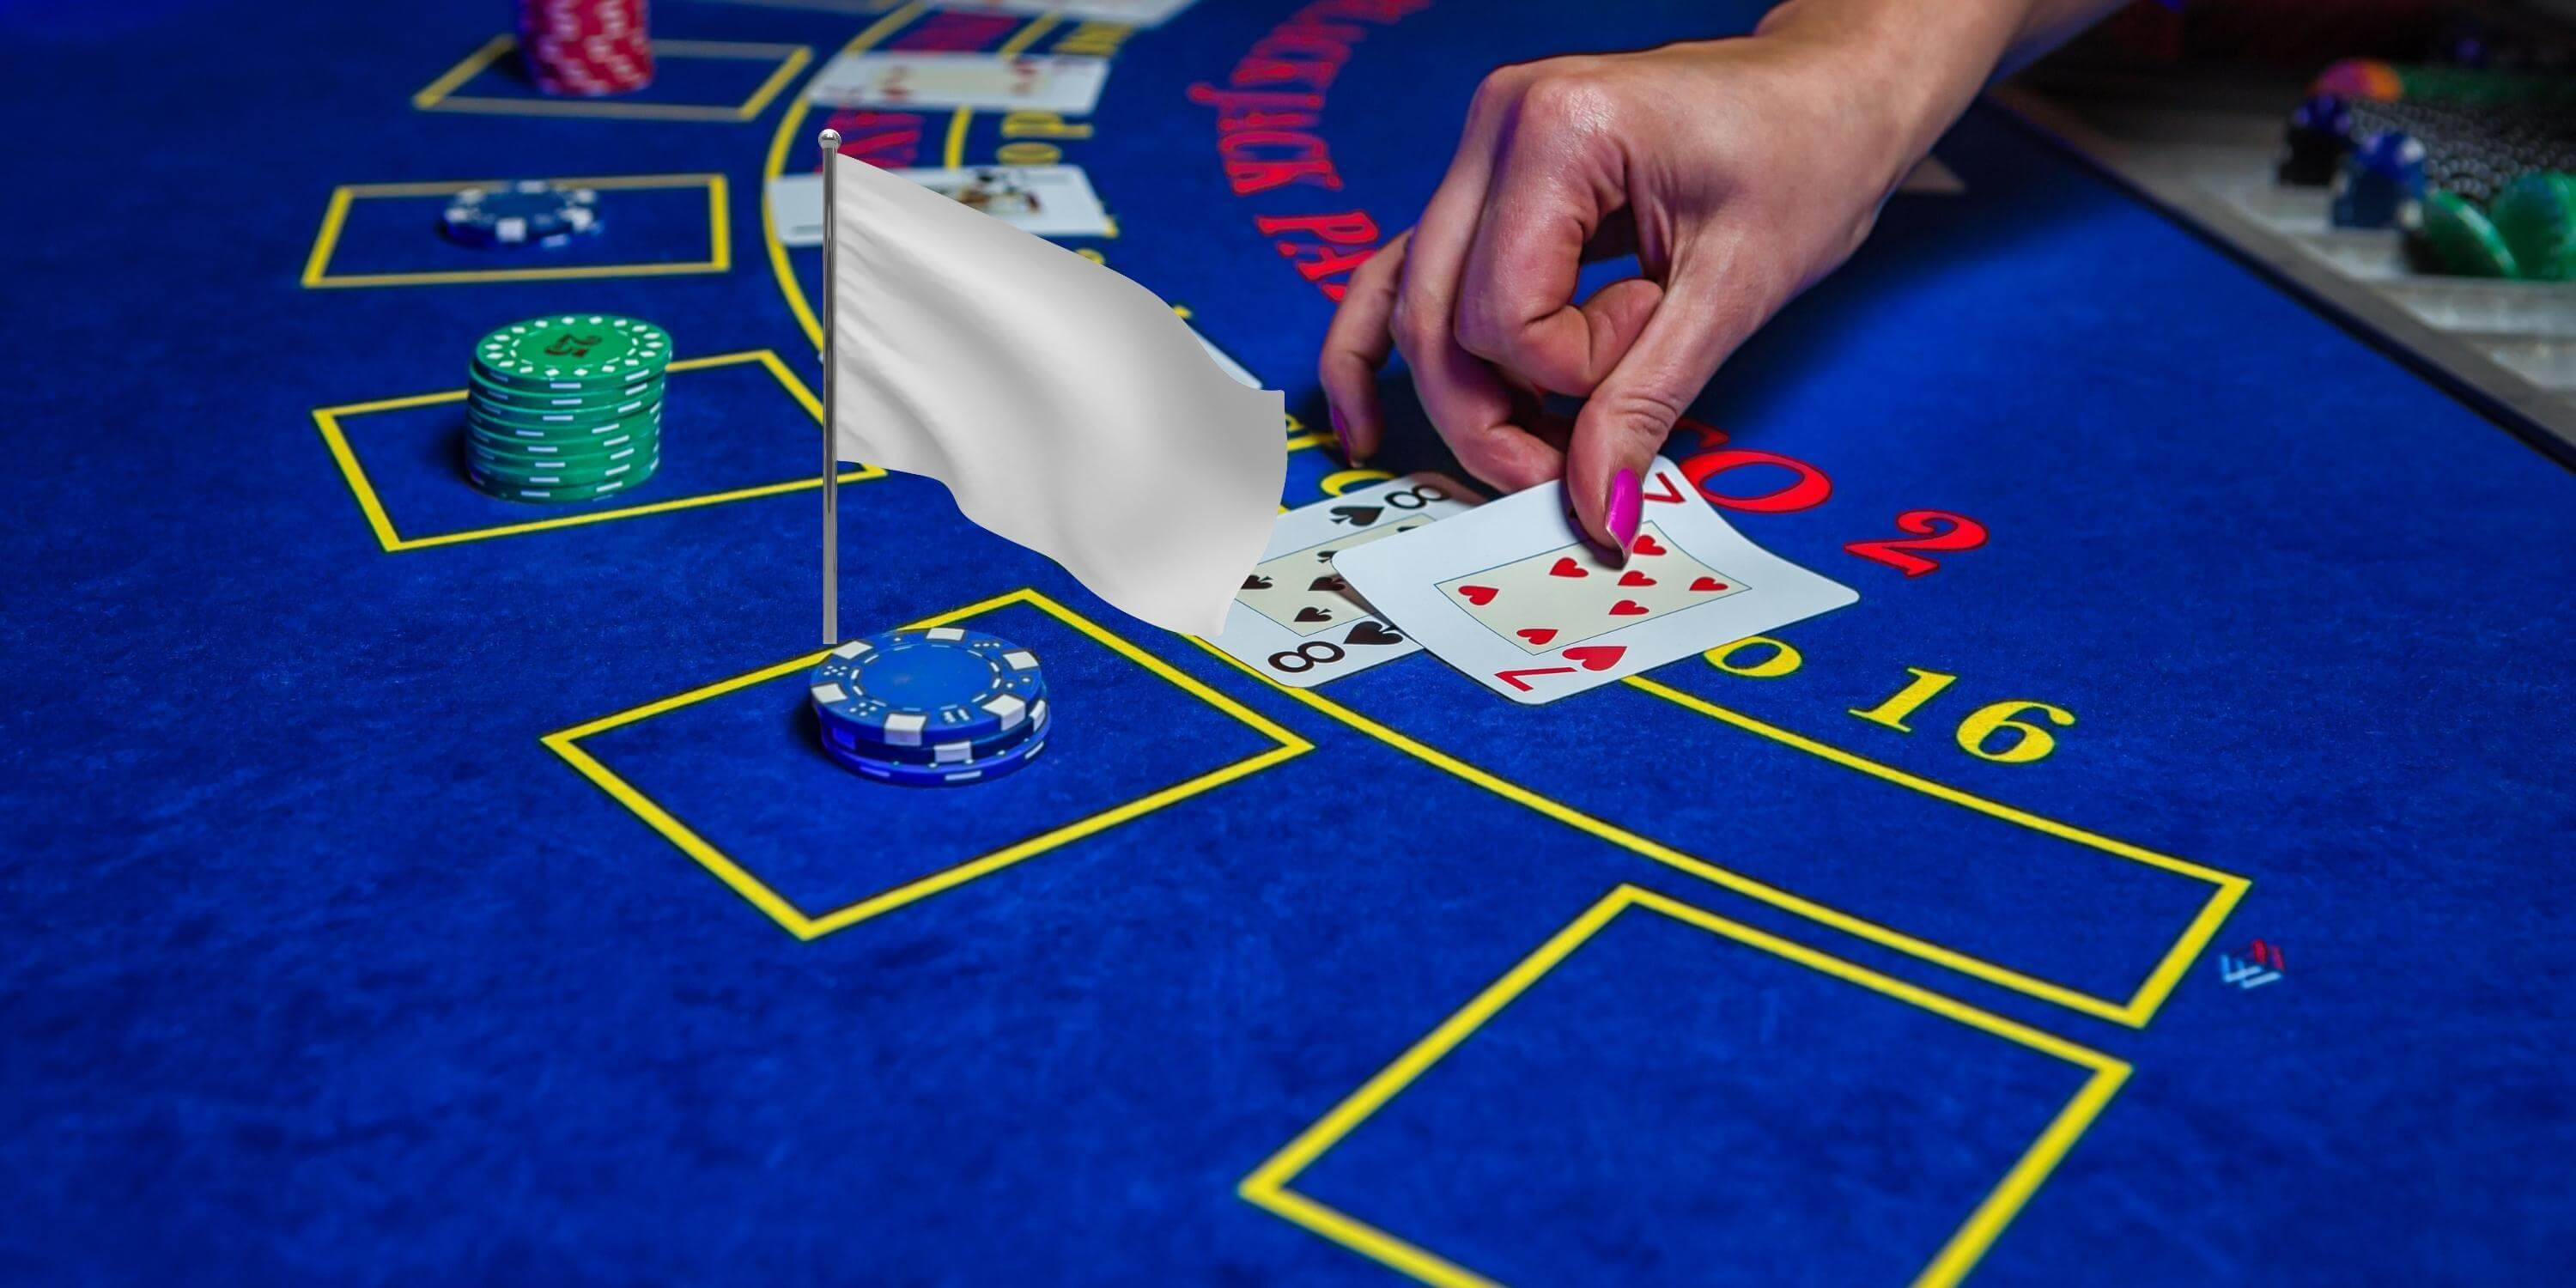 Surrender in Blackjack: Everything you need to know to gain an advantage